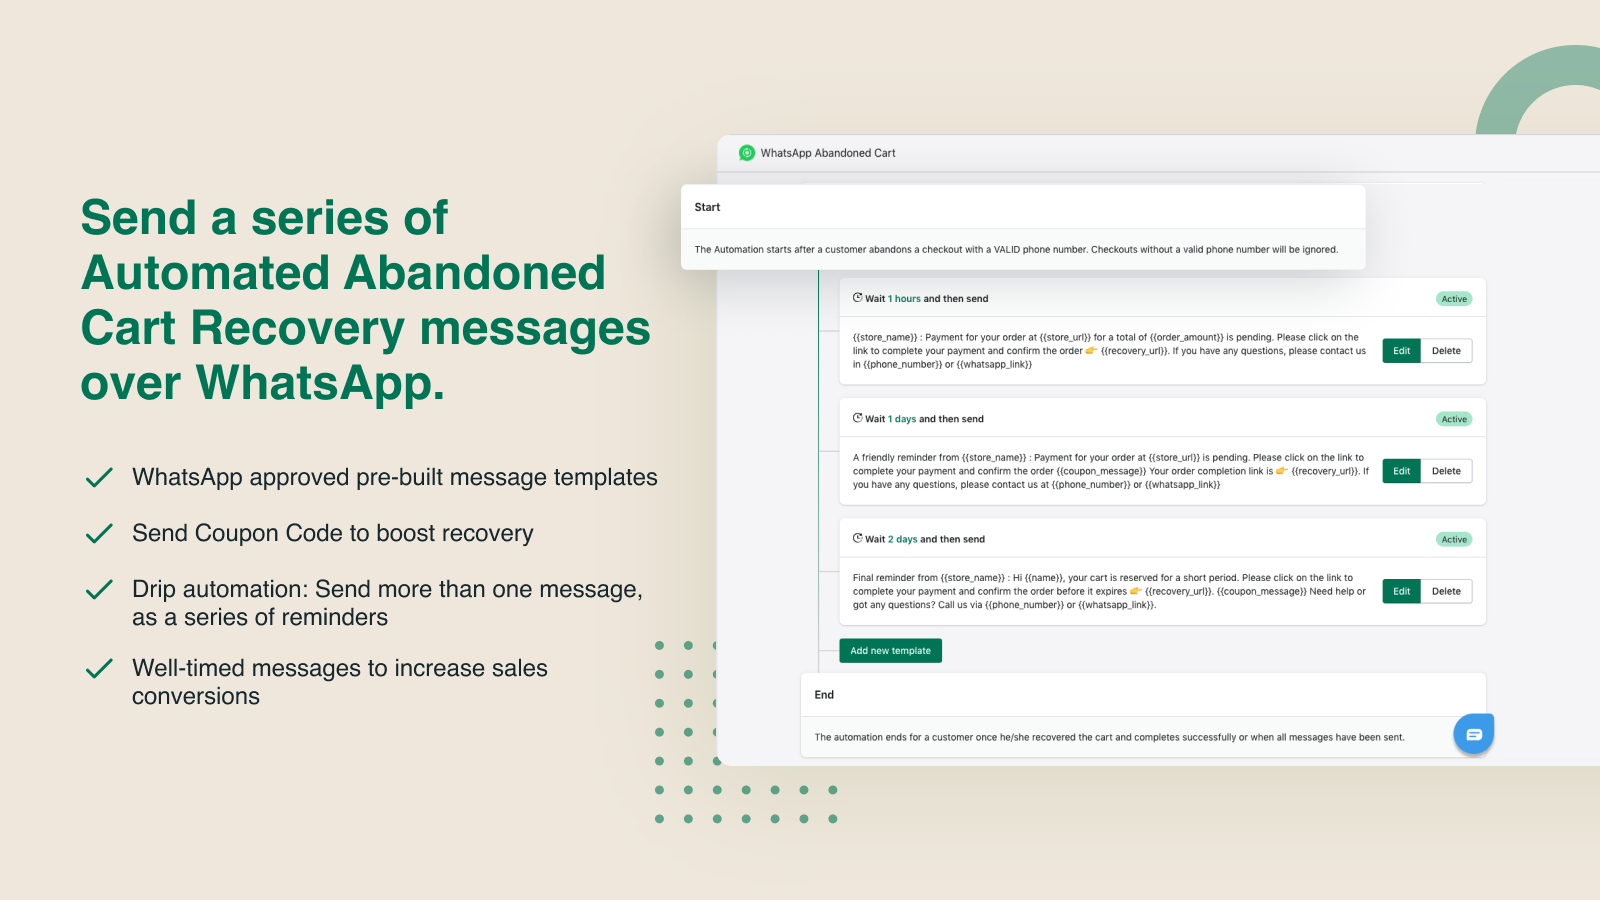 Send a series of messages over WhatsApp at well timed intervals